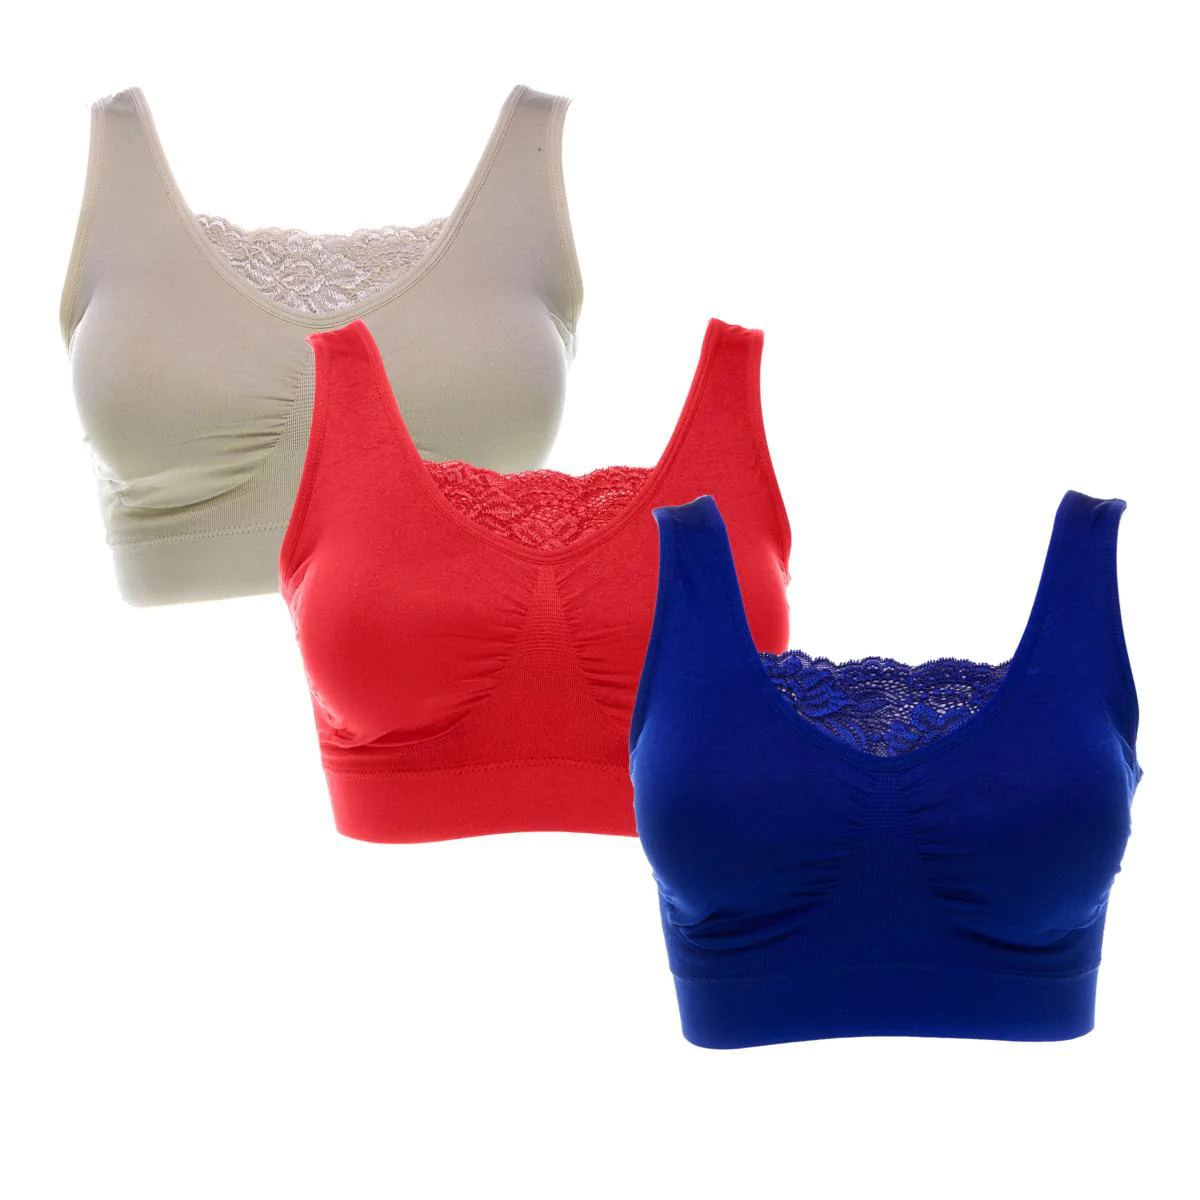 Rhonda Shear 3-Pack Ahh Bra with 1 Set Removable India